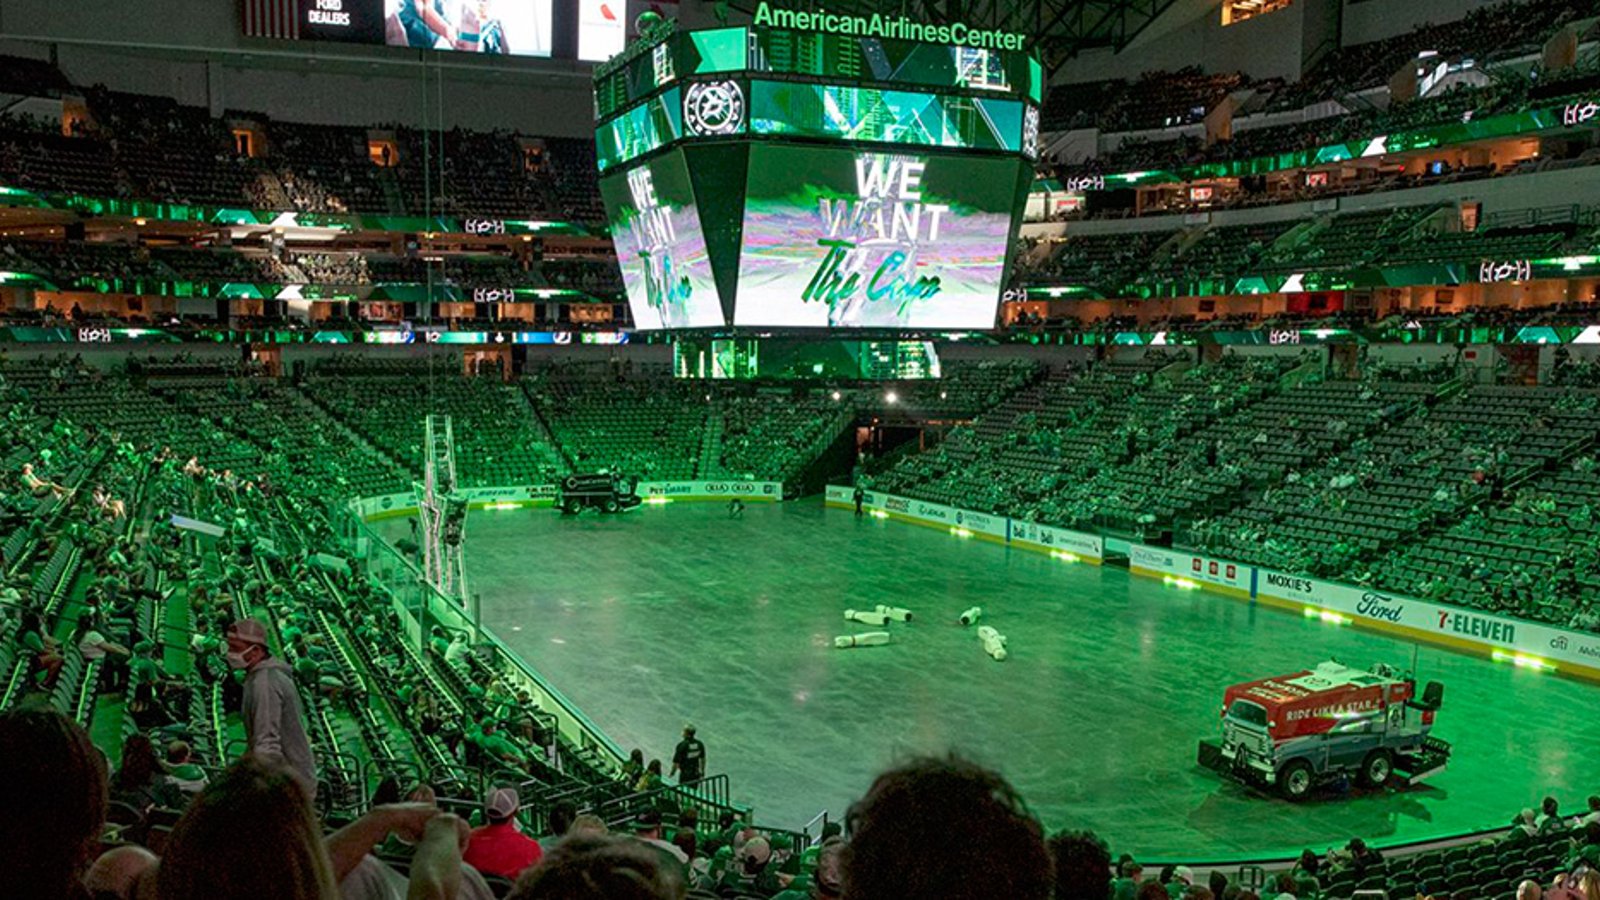 Teenage girl victimized by human traffickers at home of Dallas Stars 